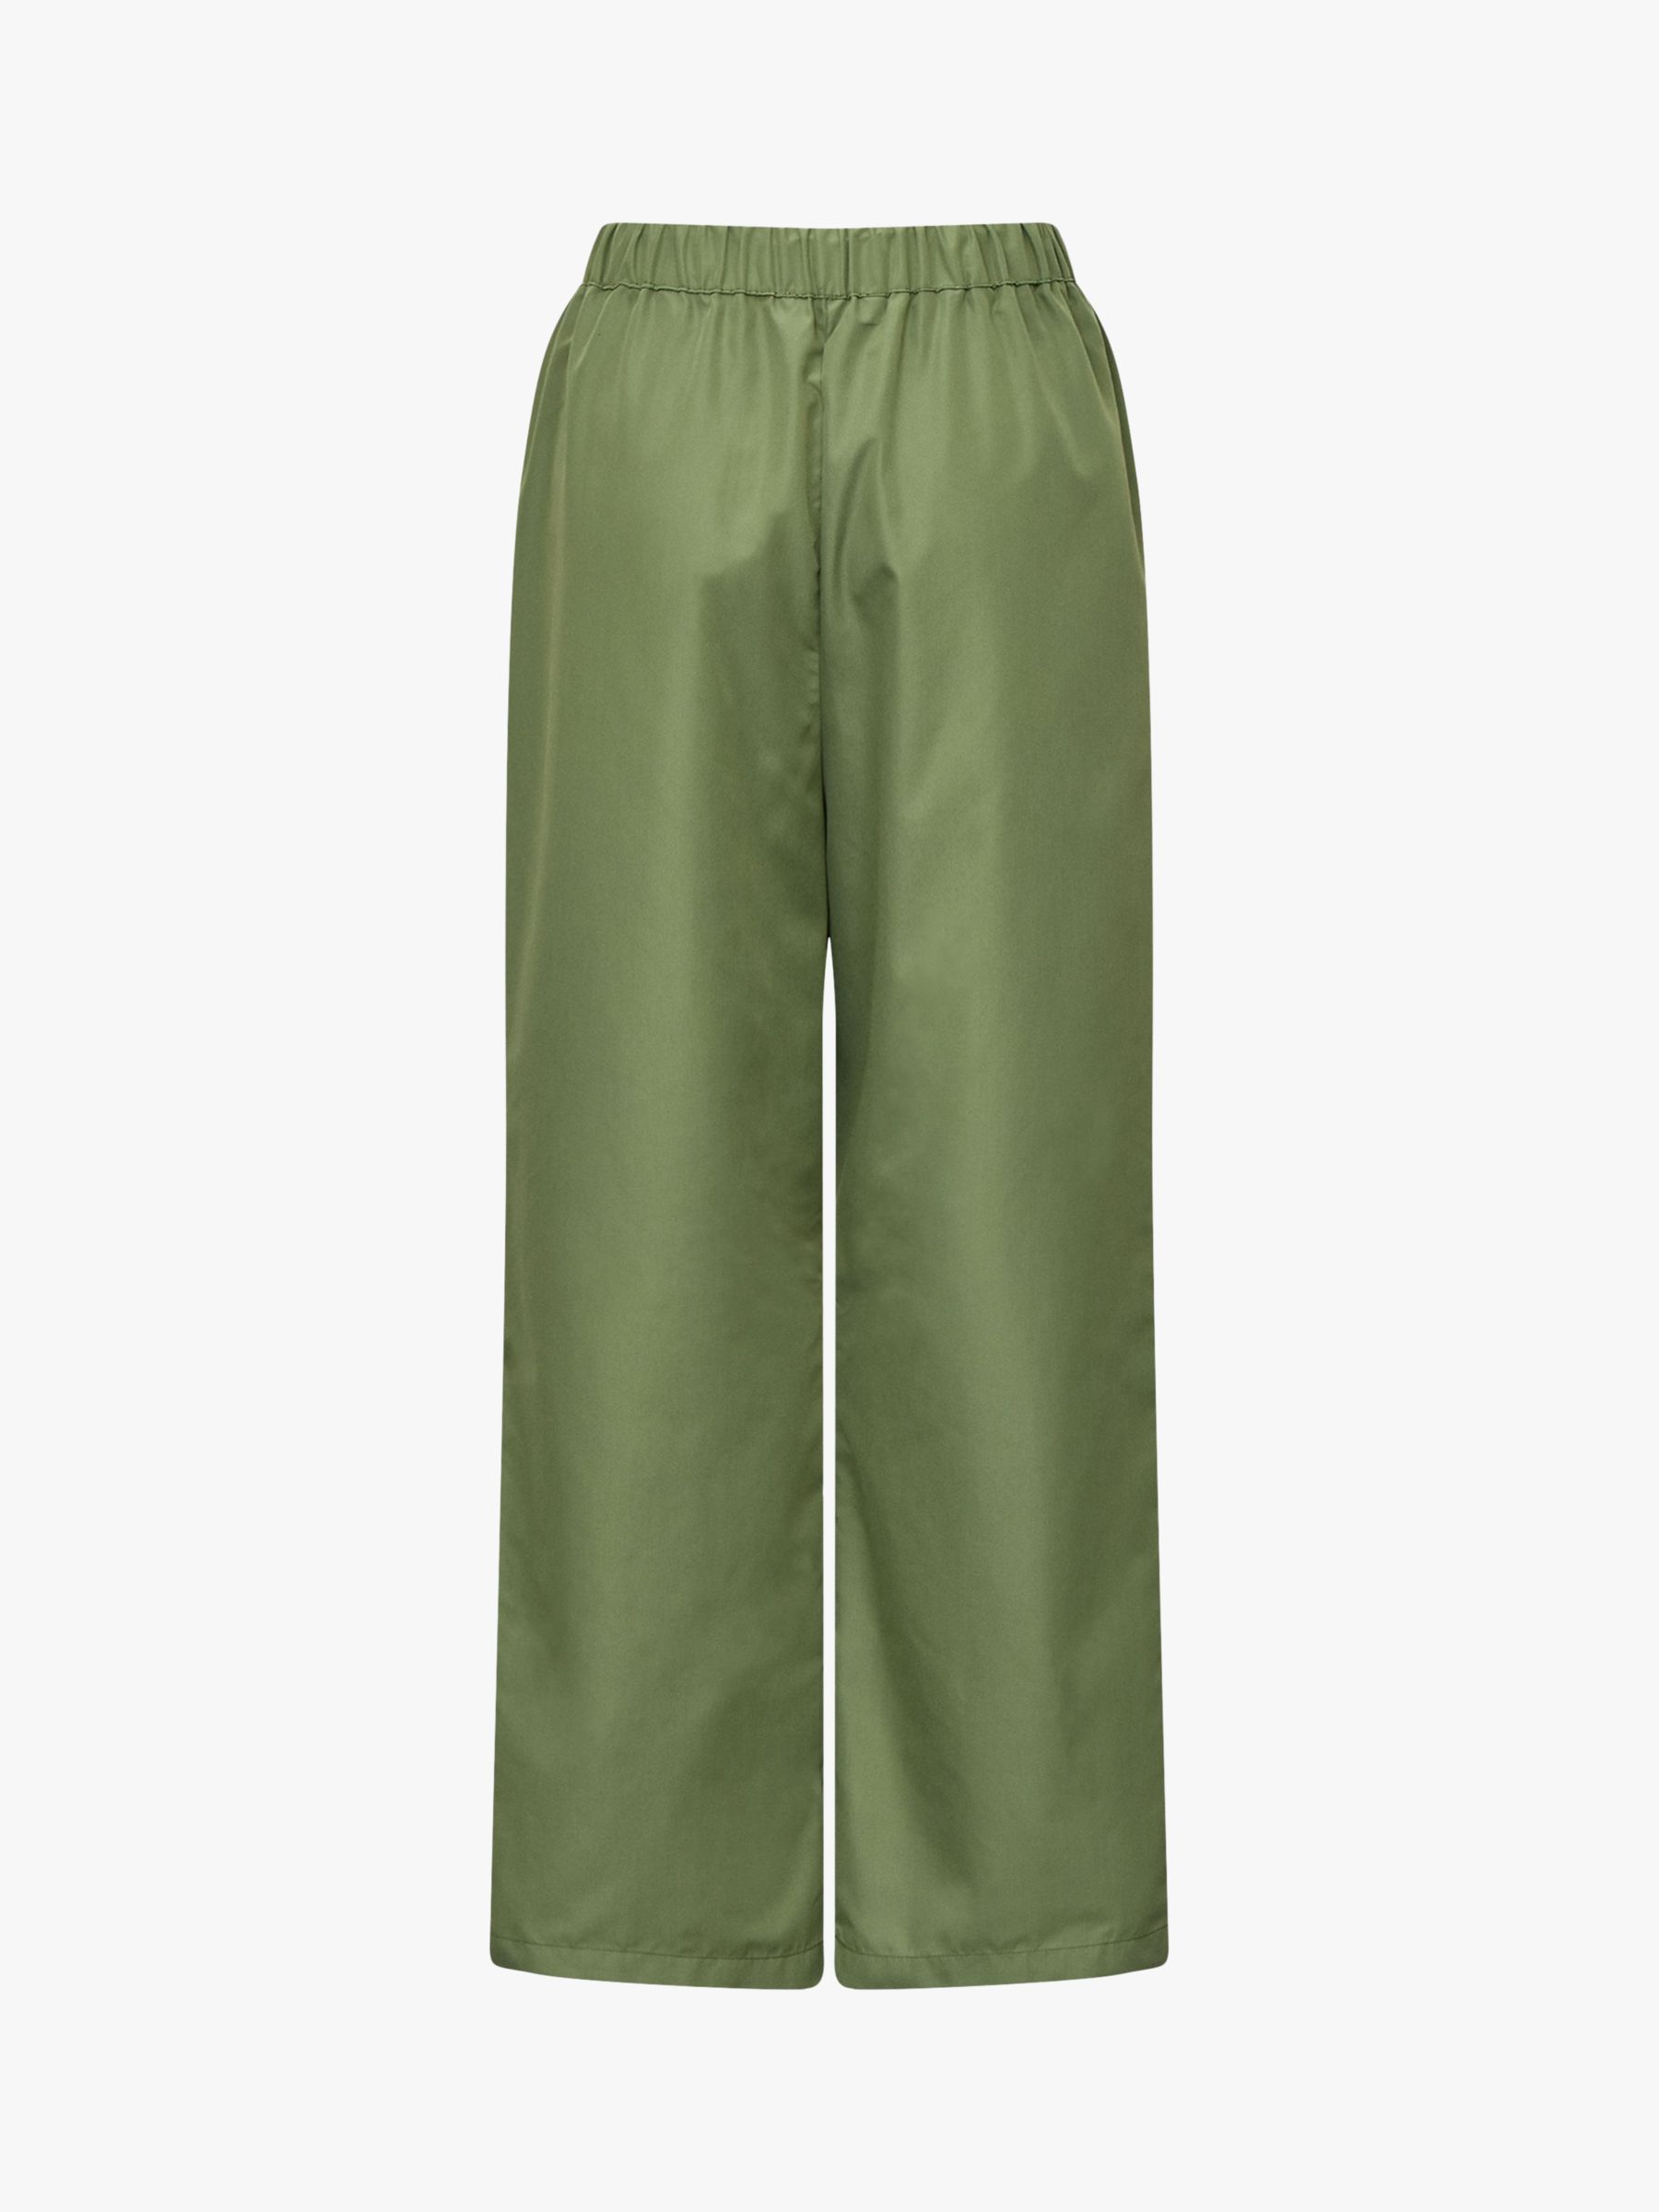 Buy A-VIEW Brenda Trousers Online at johnlewis.com